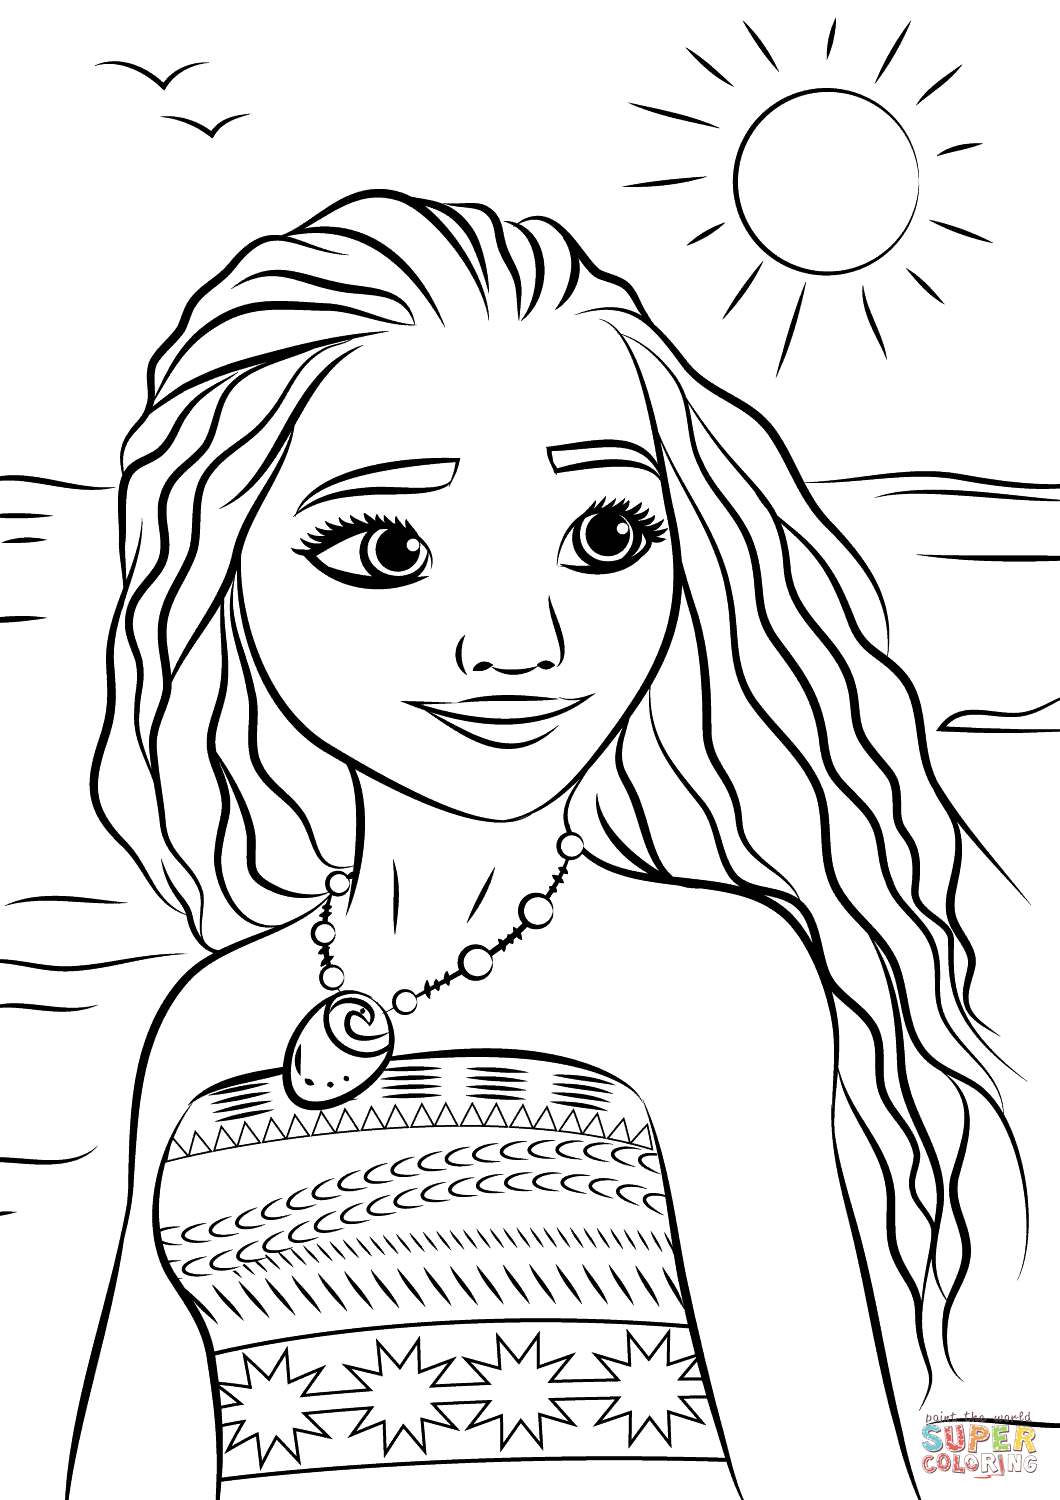 Coloring Pages : Outstanding Free Coloring Sheets For Kids Princess - Free Coloring Pages Com Printable